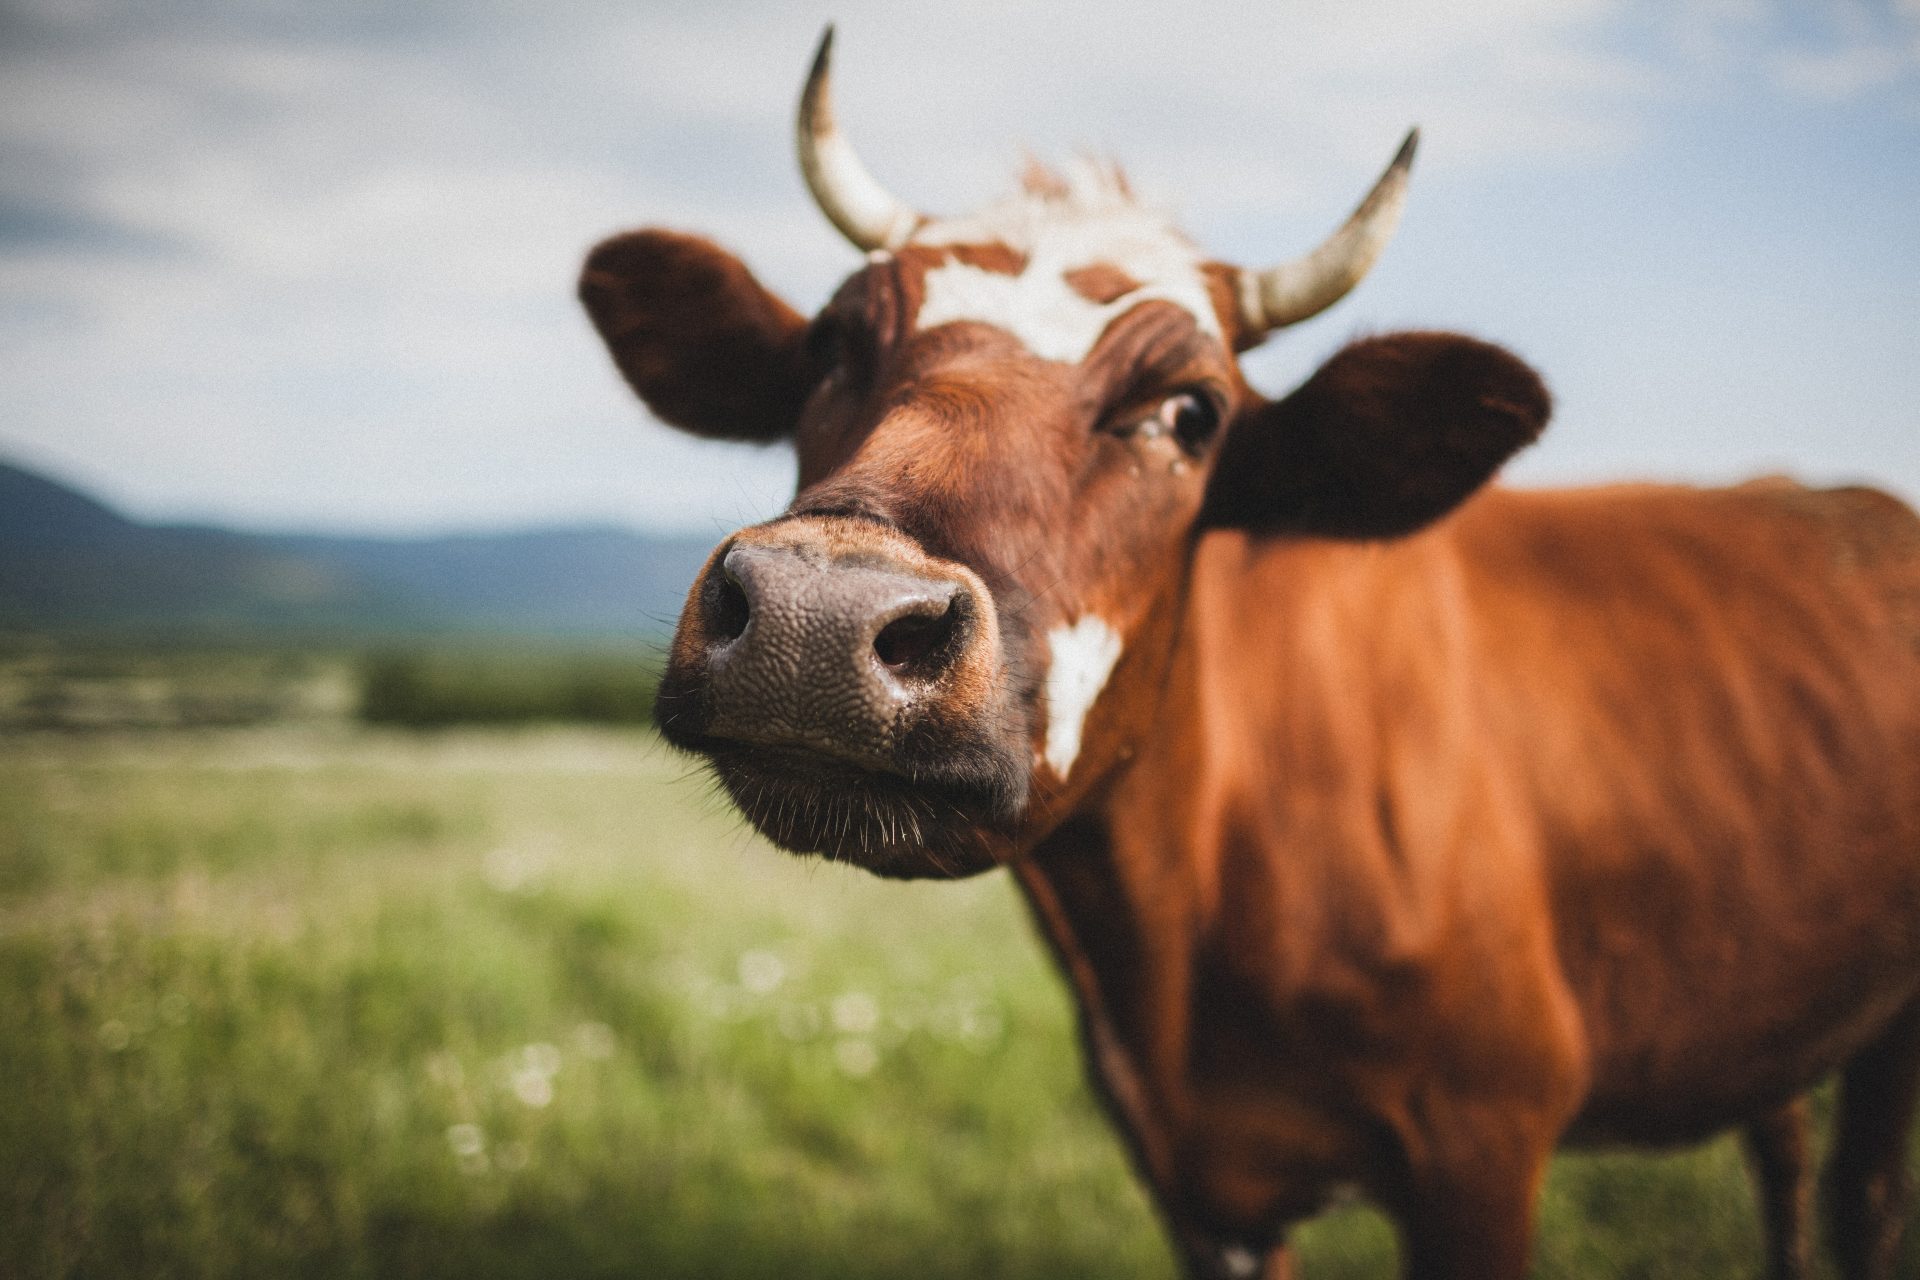 Can the cow revolutionize global food security?